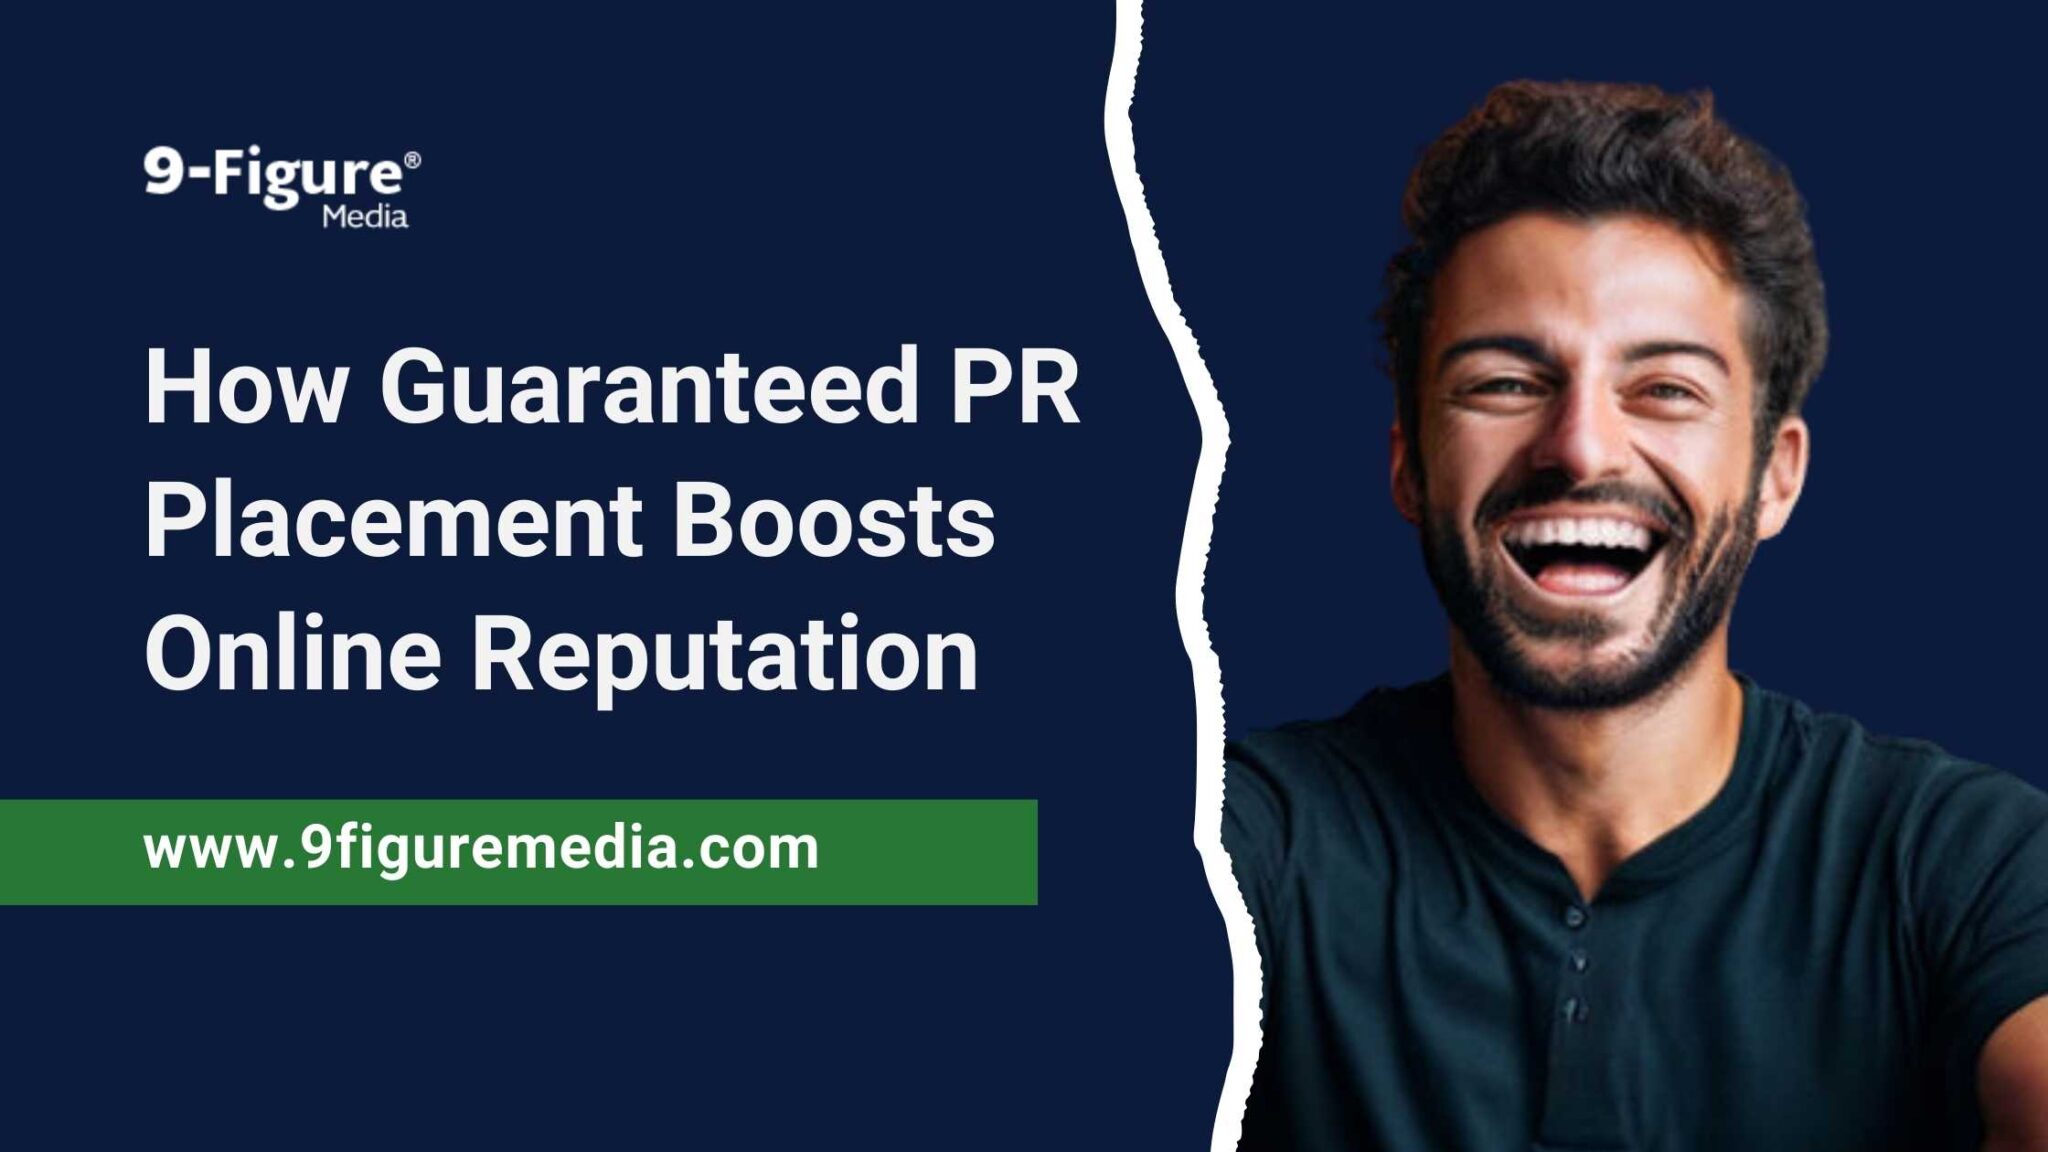 How Guaranteed PR Placement Boosts Online Reputation